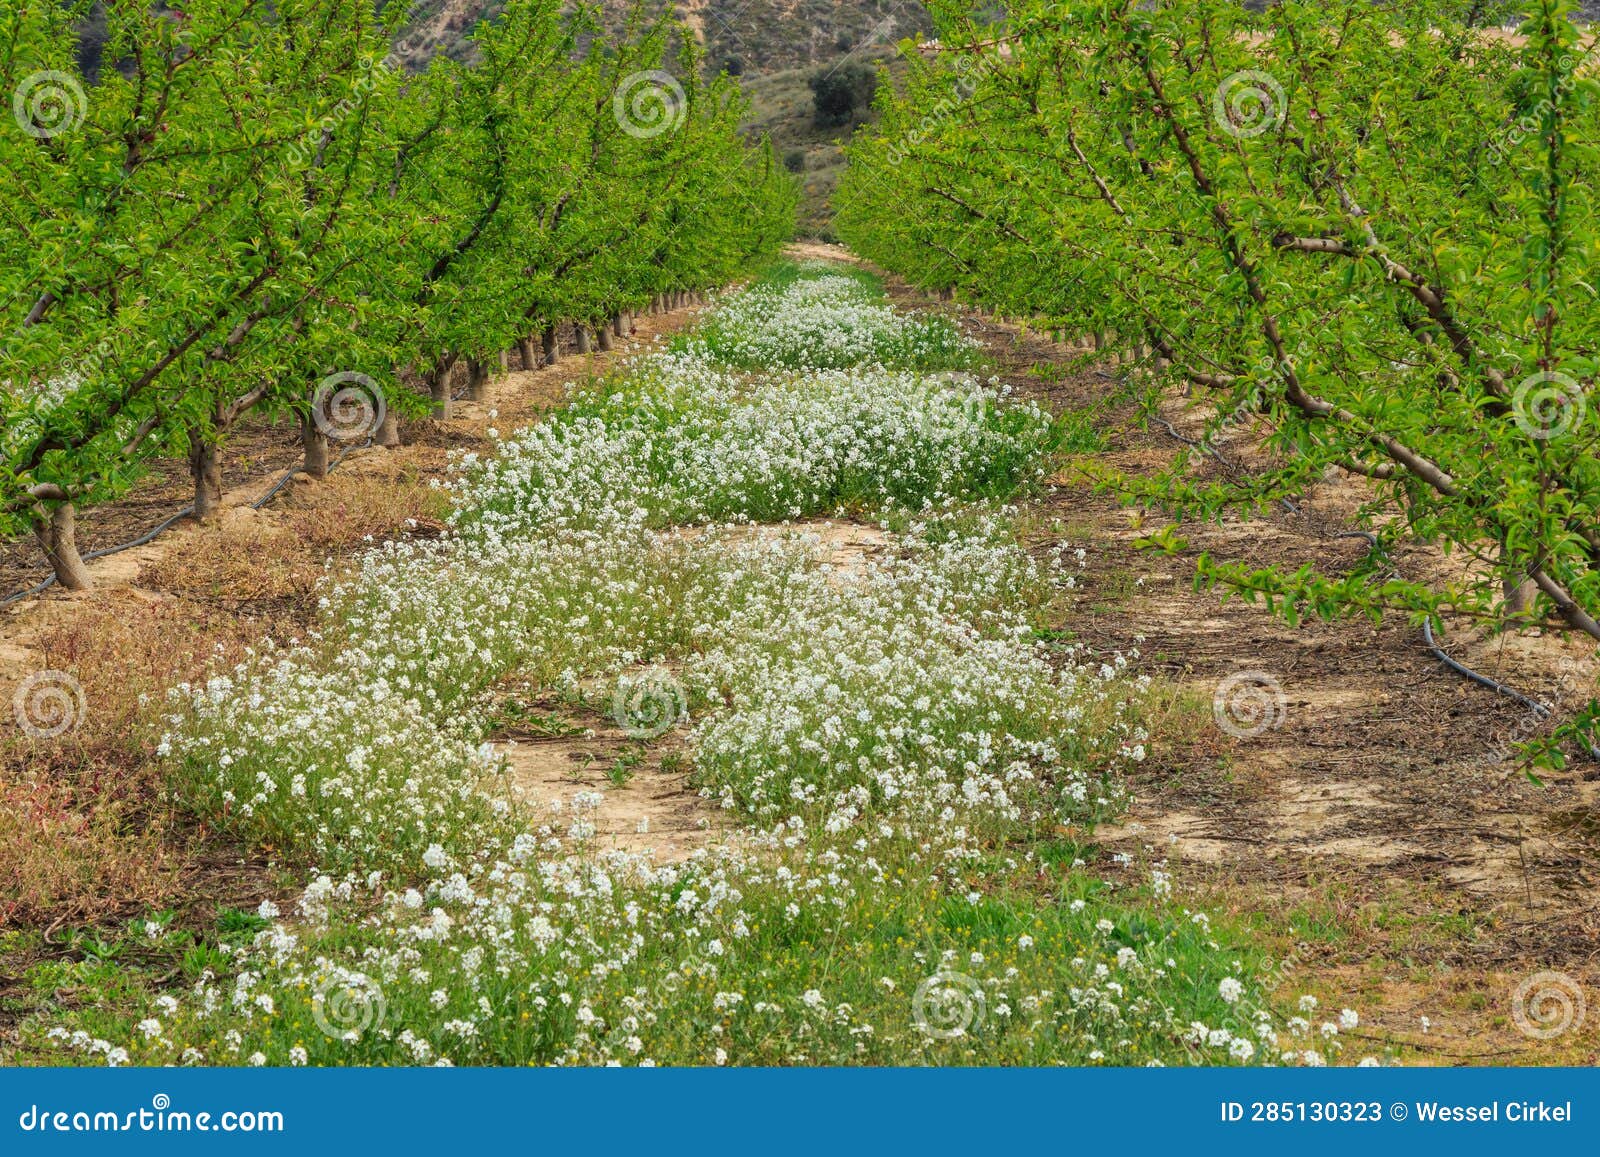 fruit orchard and flowering plants near fraga, spain